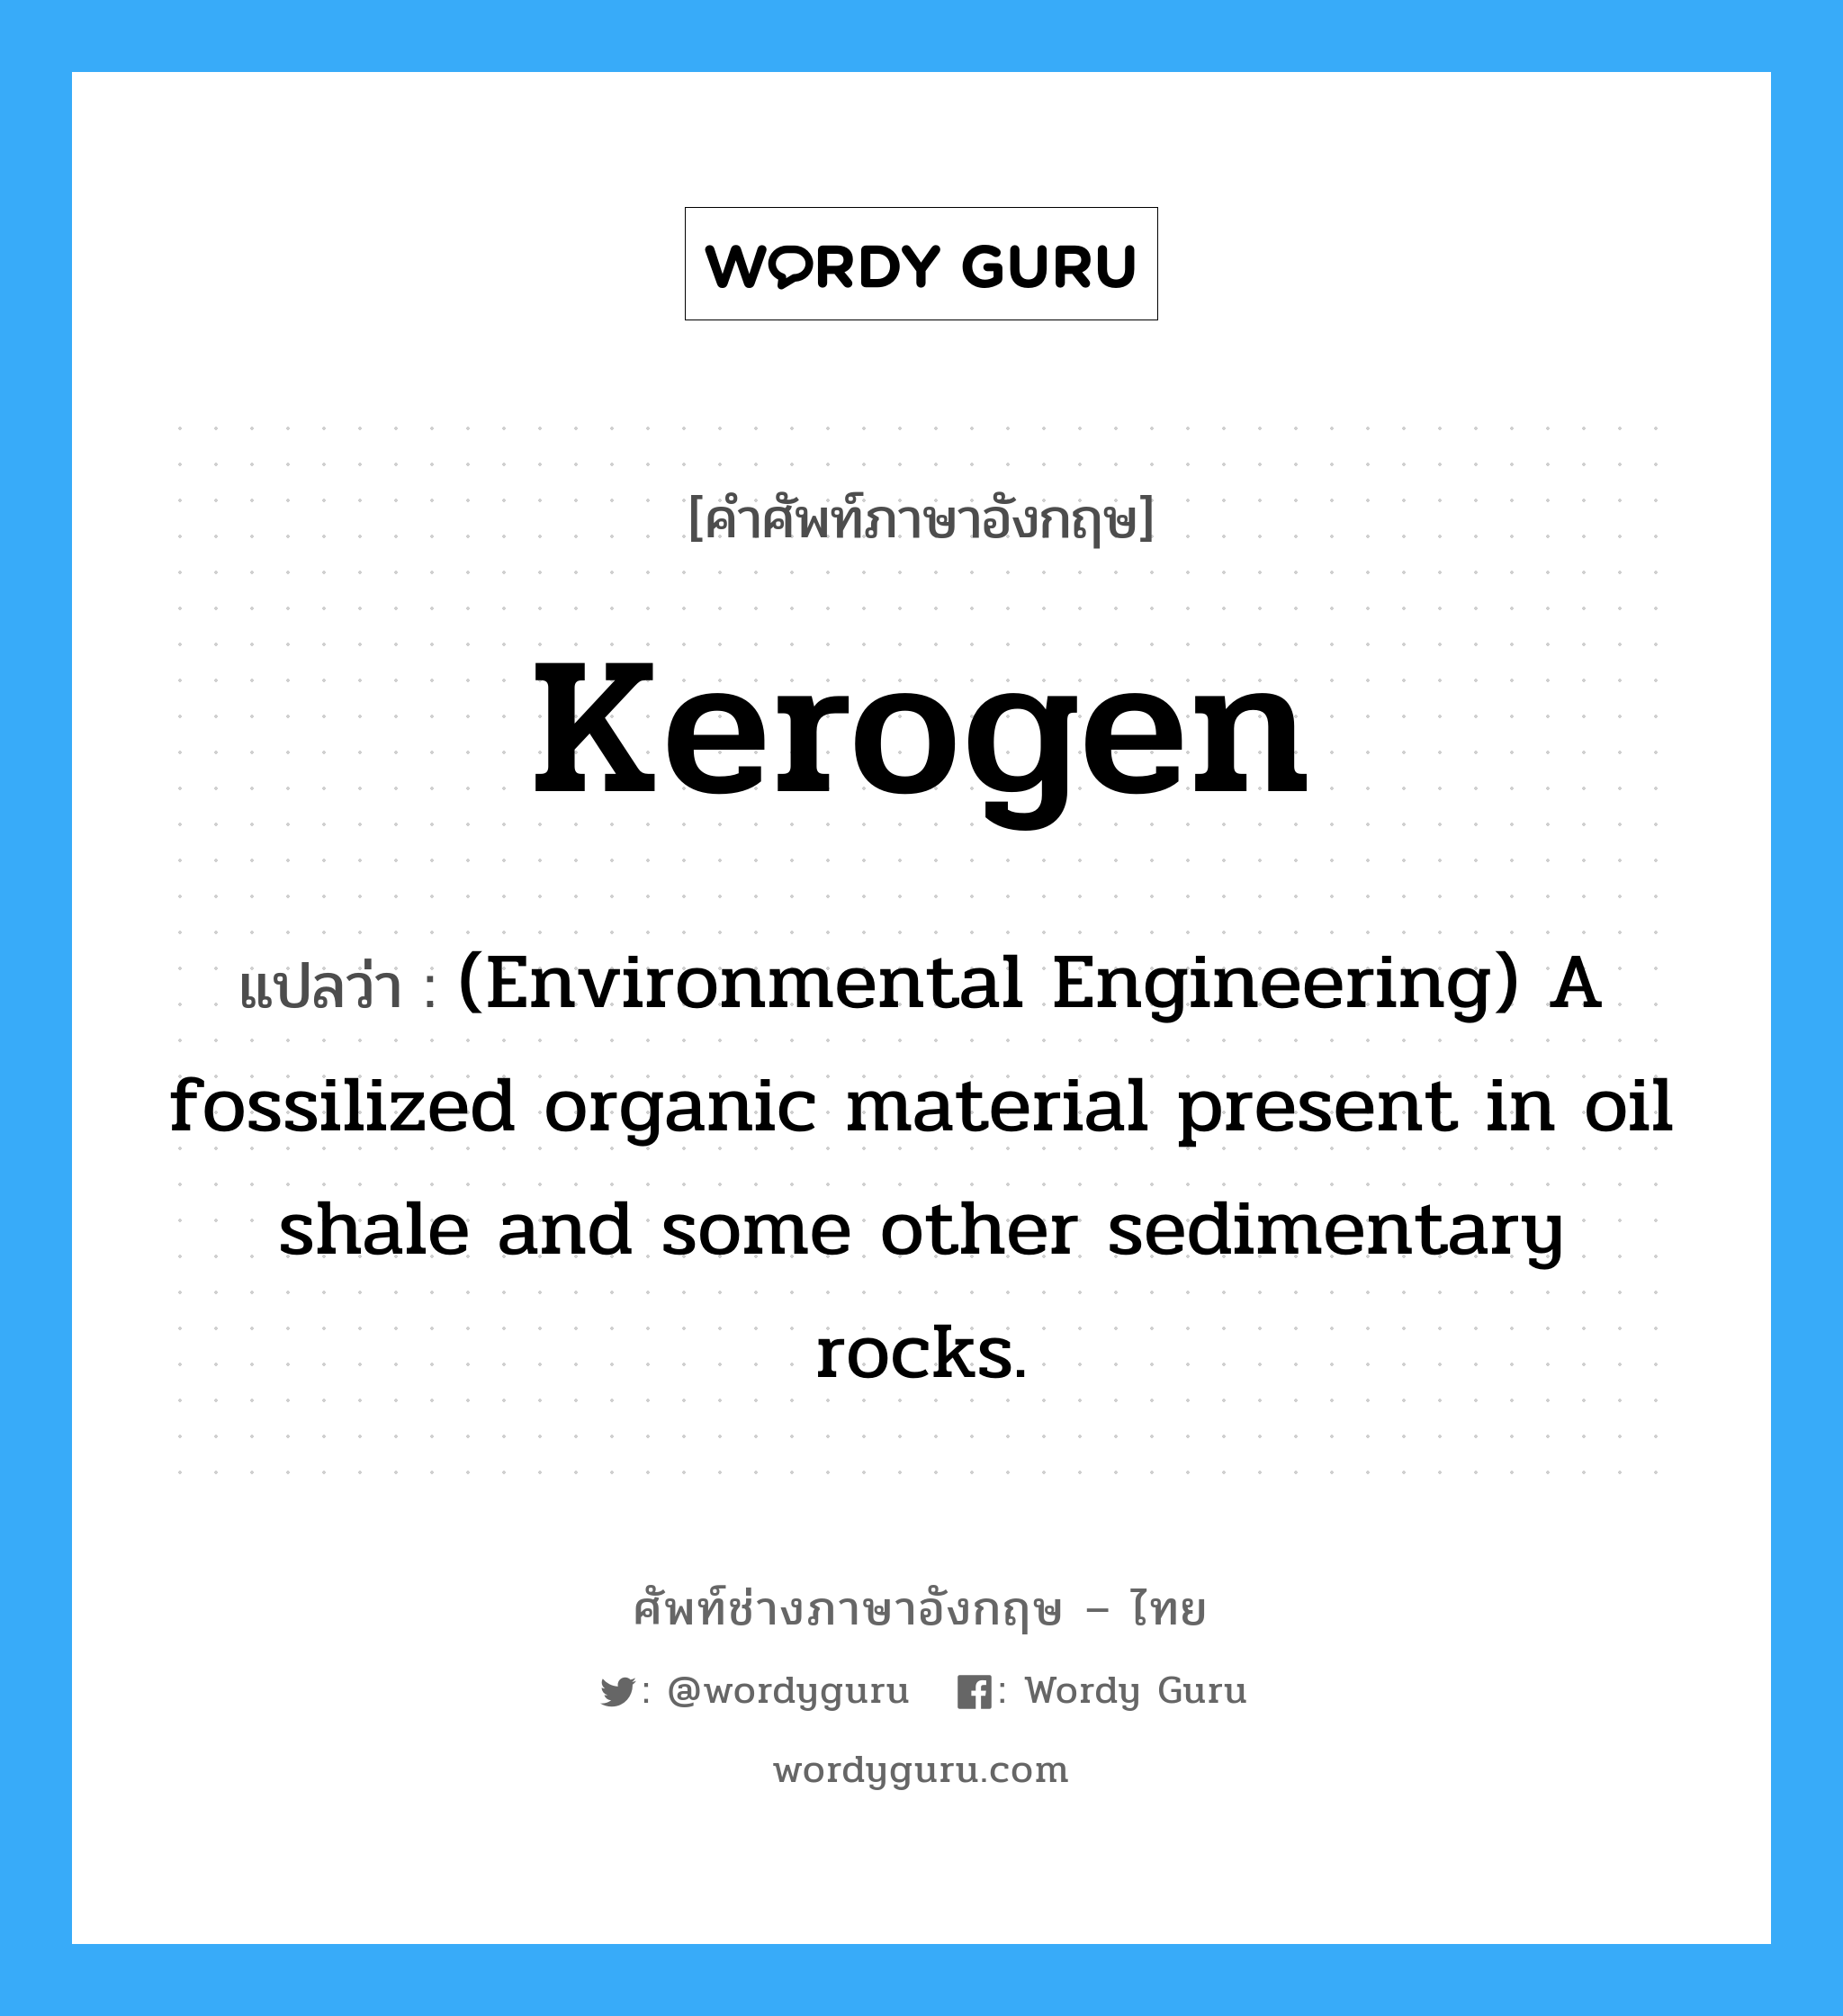 Kerogen แปลว่า?, คำศัพท์ช่างภาษาอังกฤษ - ไทย Kerogen คำศัพท์ภาษาอังกฤษ Kerogen แปลว่า (Environmental Engineering) A fossilized organic material present in oil shale and some other sedimentary rocks.